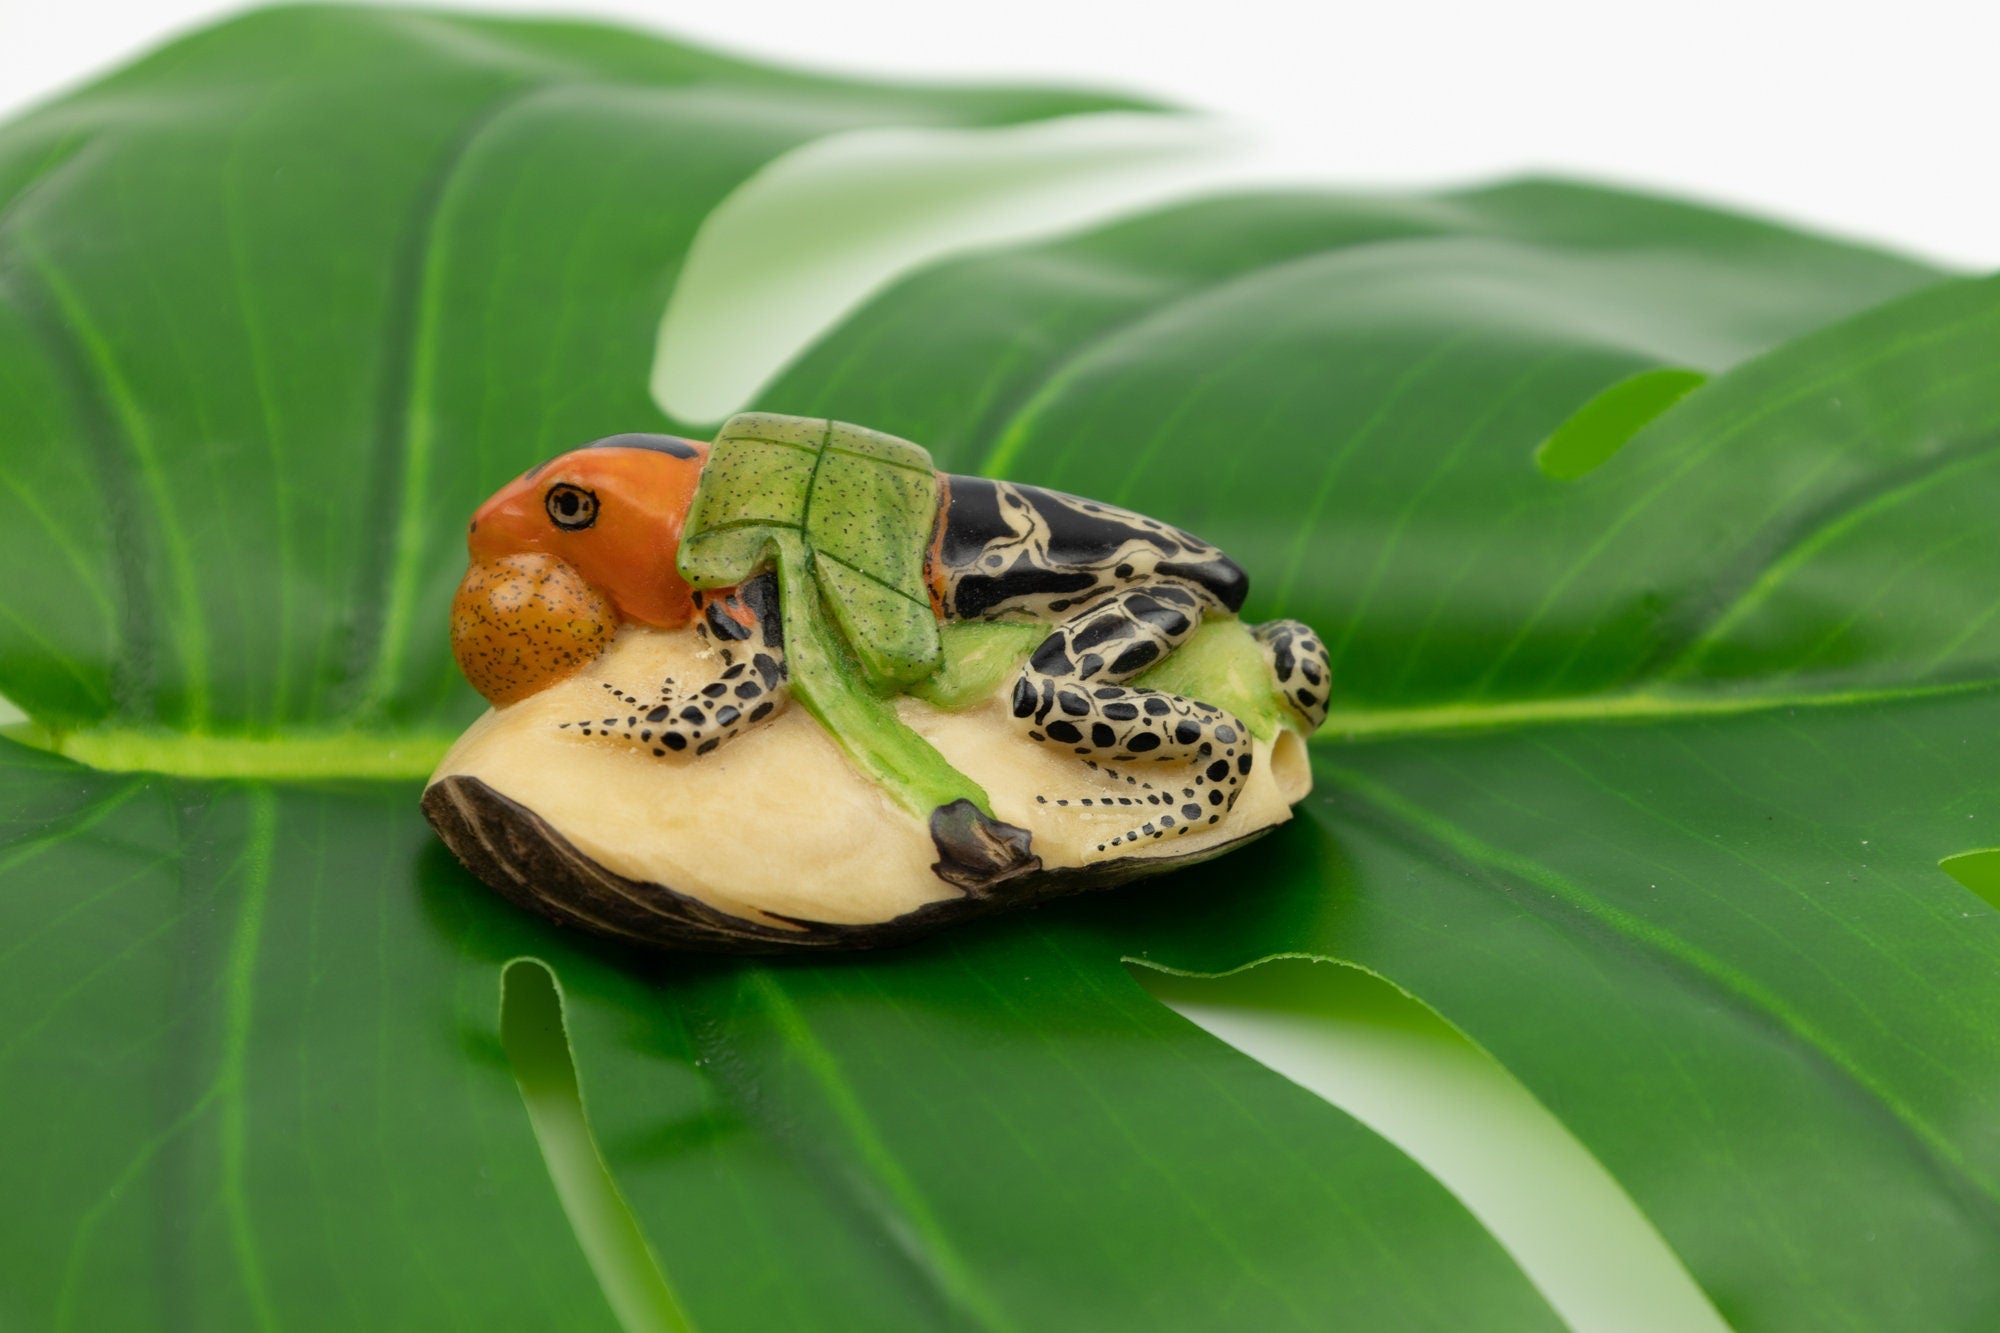 Hand Carved Blow throat Poison Dart Frog Tagua Nut Made By Wounaan And Emberá Panama Indians. Animal Statue, Carving Miniature, Figurine